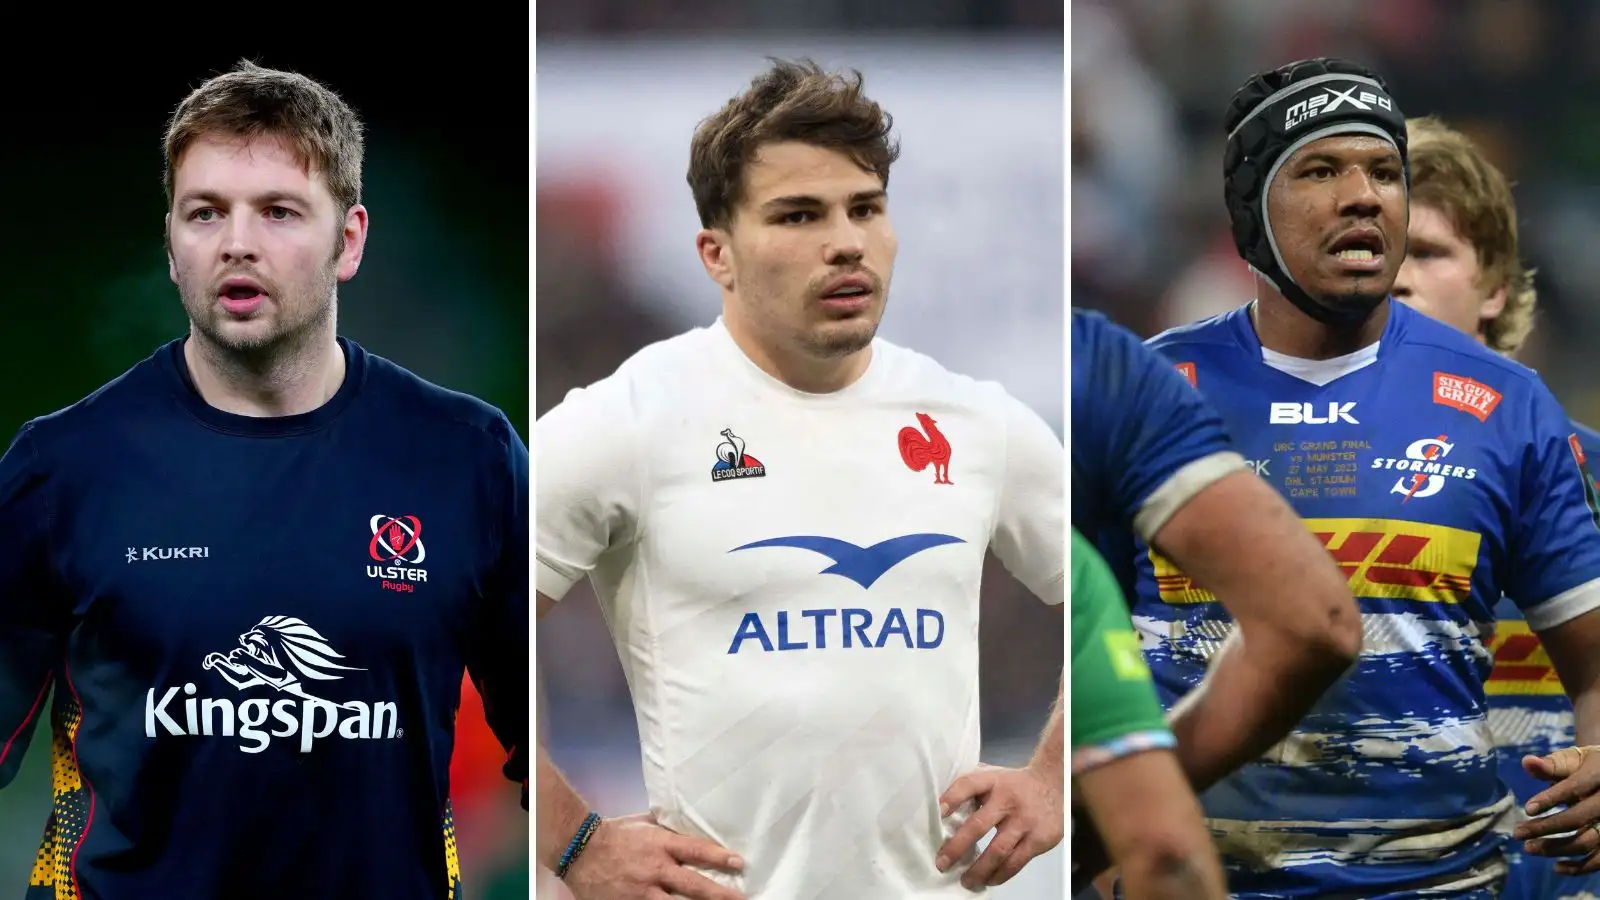 Planet Rugby recaps seven rugby rumours and transfers ahead of the weekend, including Iain Henderson, Marvin Orie, Antoine Dupont and much more.